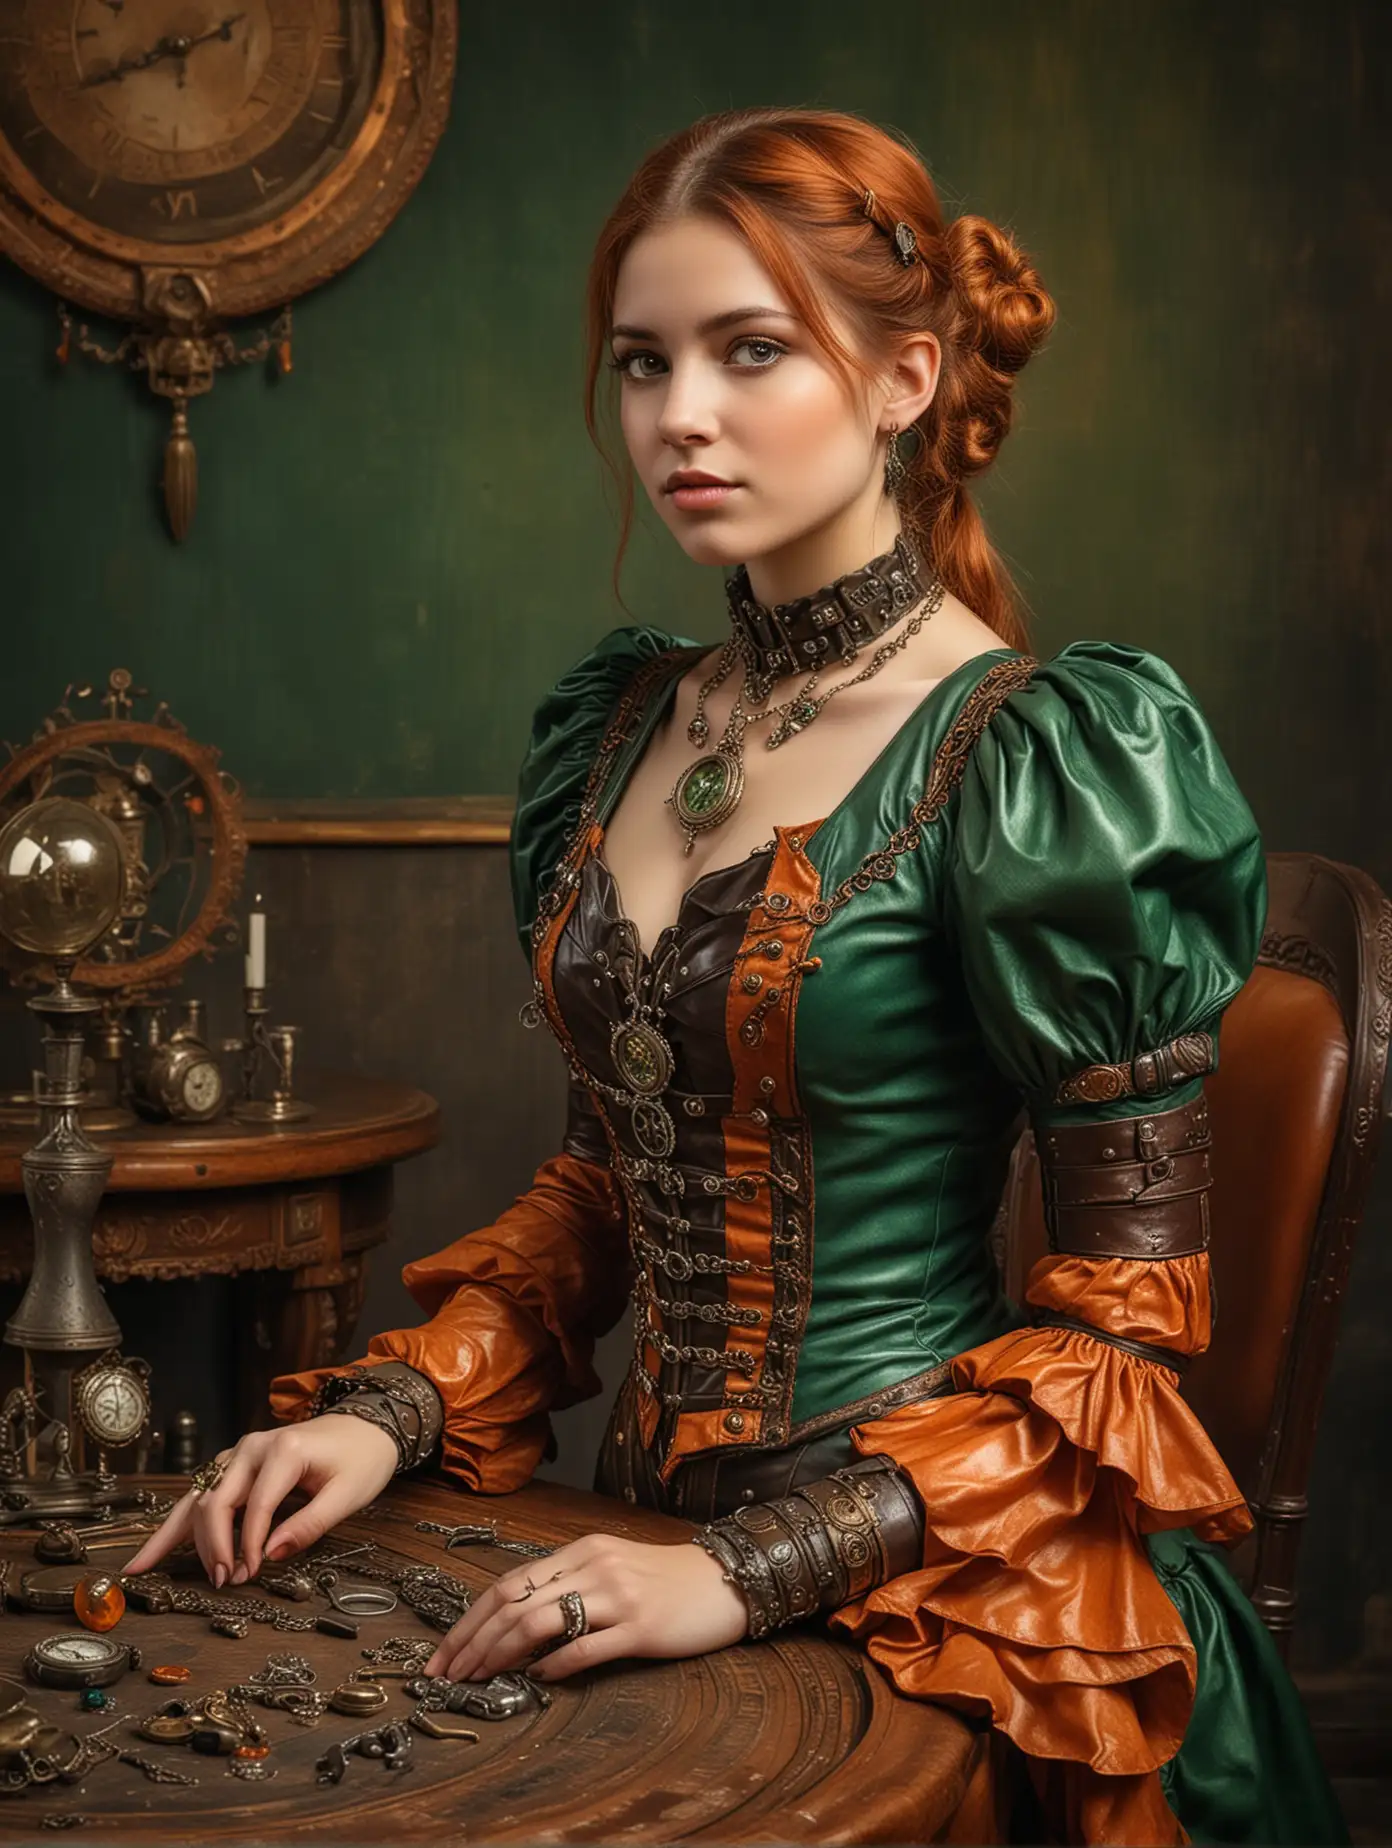 Elegant Steampunk Woman in Green and Orange Dress at Round Table